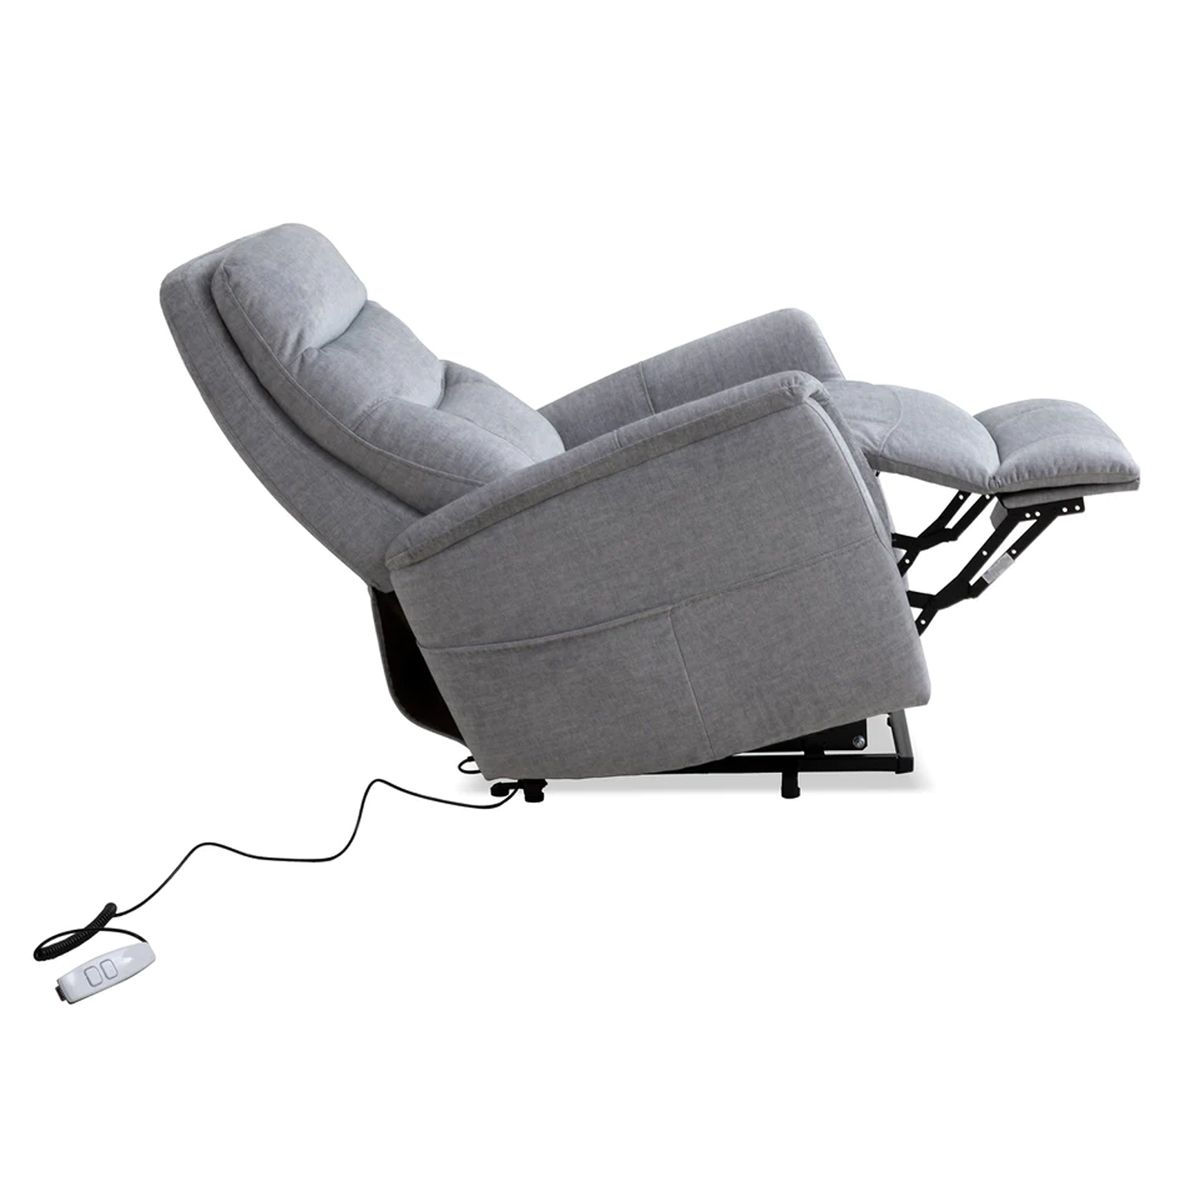 Picture of GEMINI SILVER LIFT RECLINER WITH POWER HEADREST